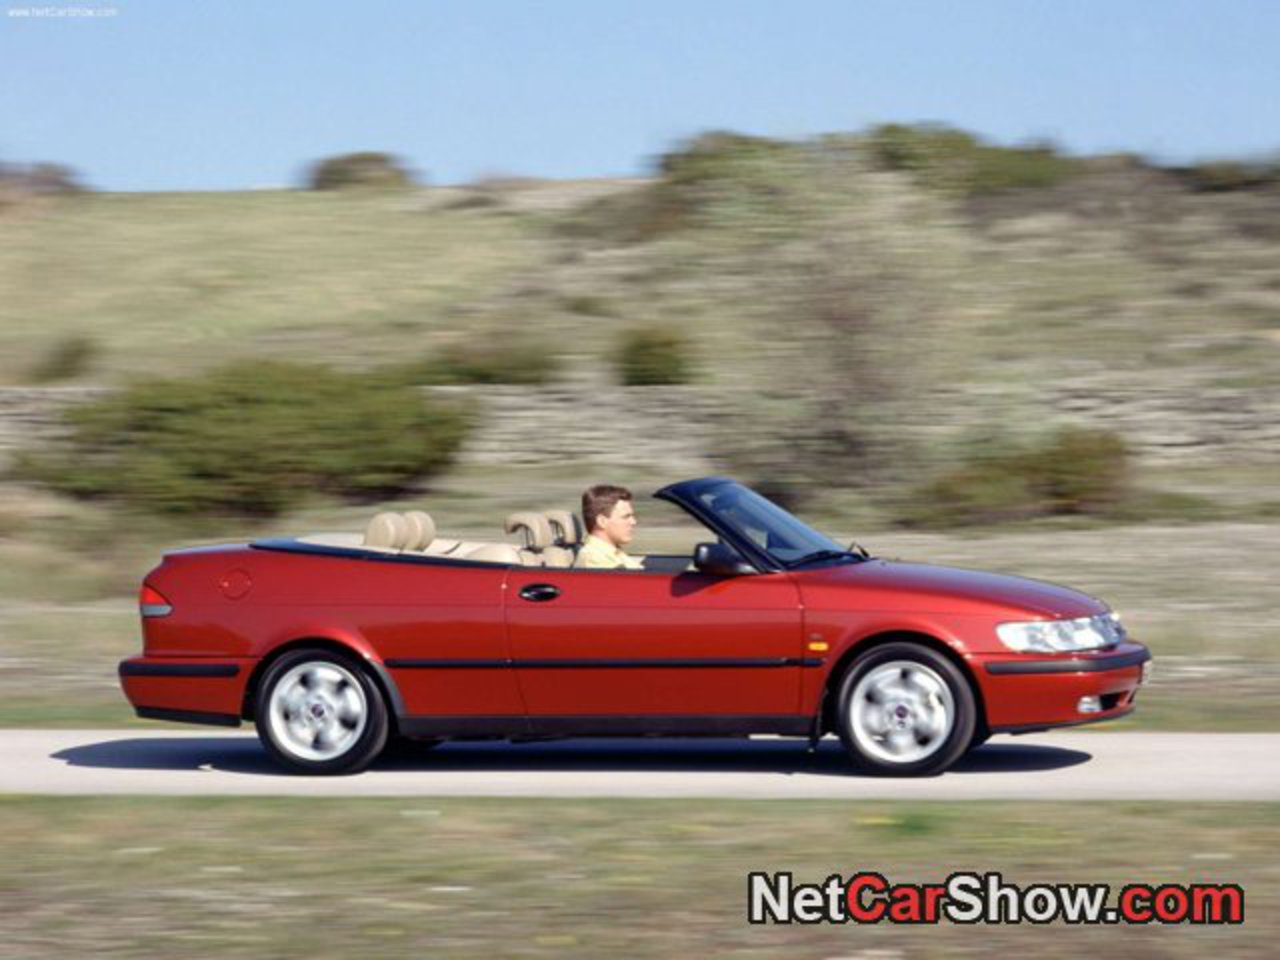 Saab 9-3 Convertible picture # 07 of 14, Side, MY 1999, 1024x768